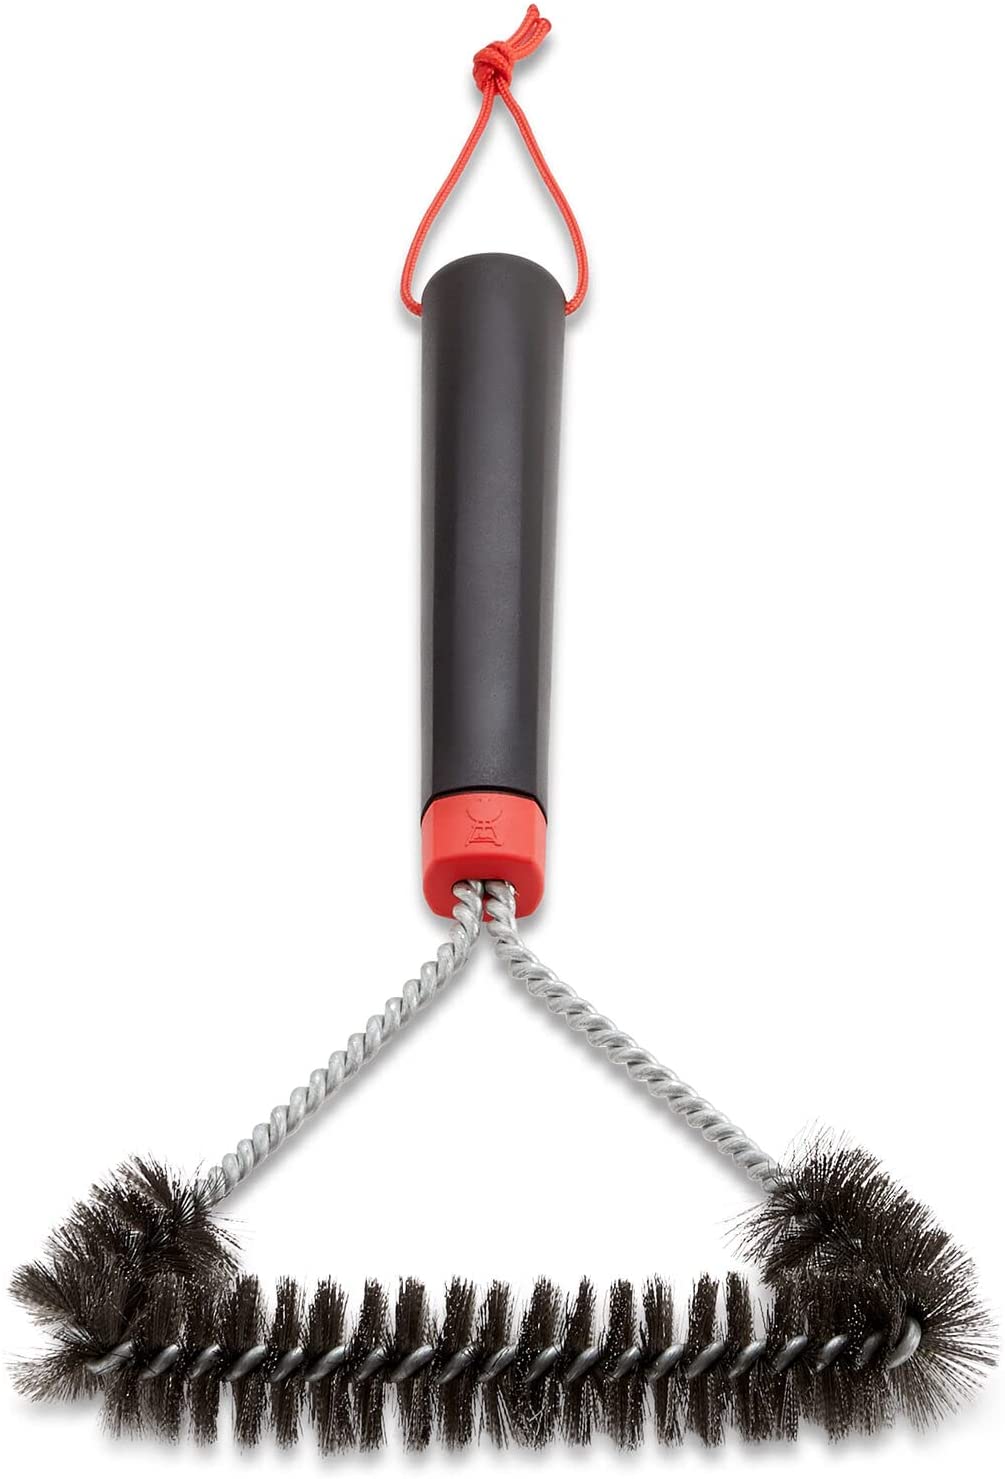 61BELnufuuL._AC_SL1500_ Best Amazon Grill Brushes: Your Guide to the Top 5 Picks for 2023